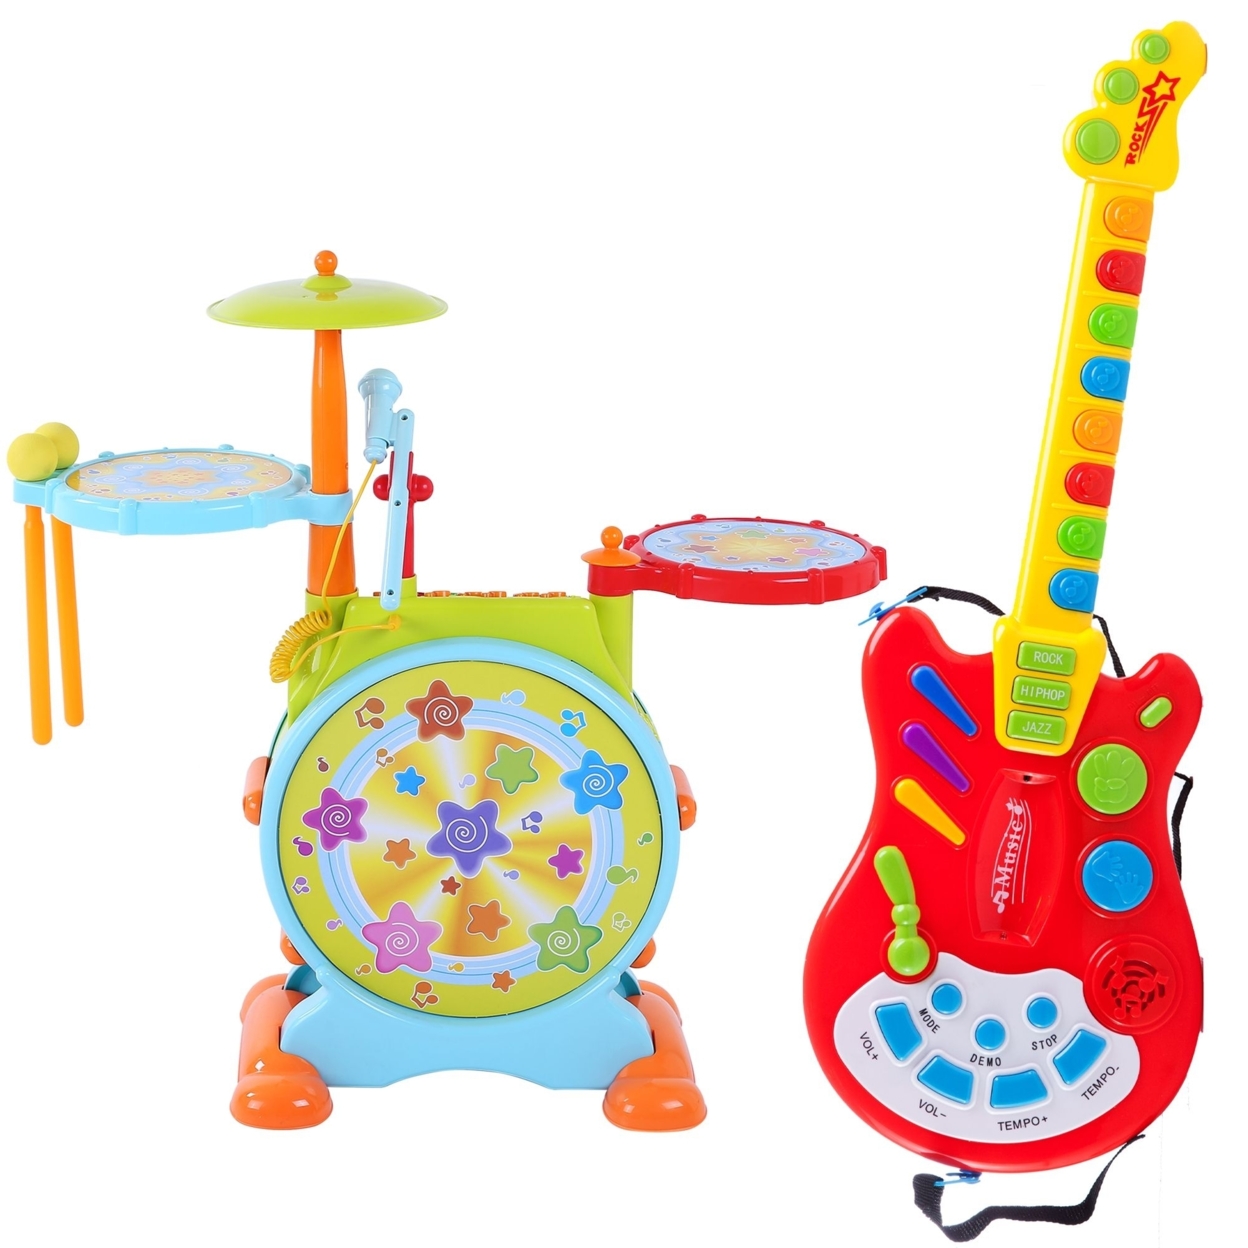 Dimple Toy Electric Guitar With Over 20 Interactive Buttons And Electric Big Toy Drum Set For Kids Comes With Microphone Pedal And Stool